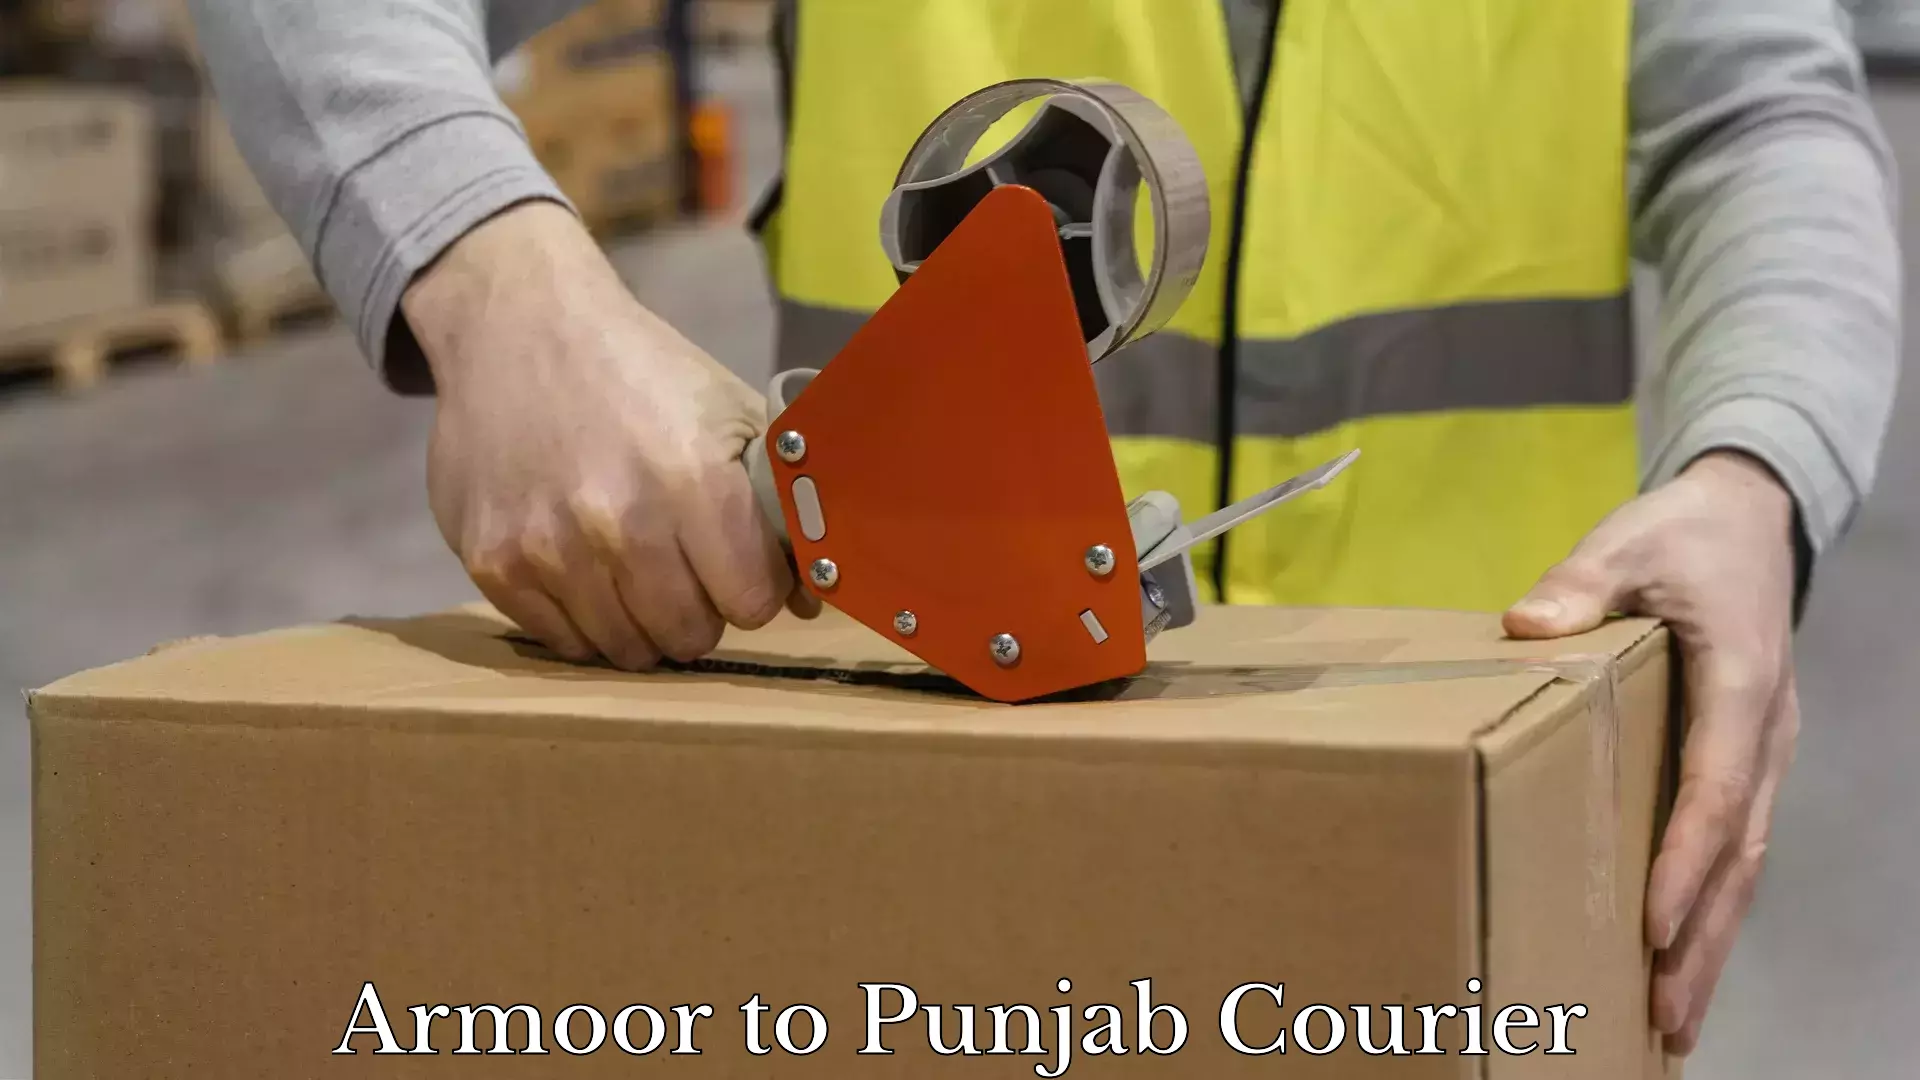 Furniture delivery service Armoor to Ludhiana